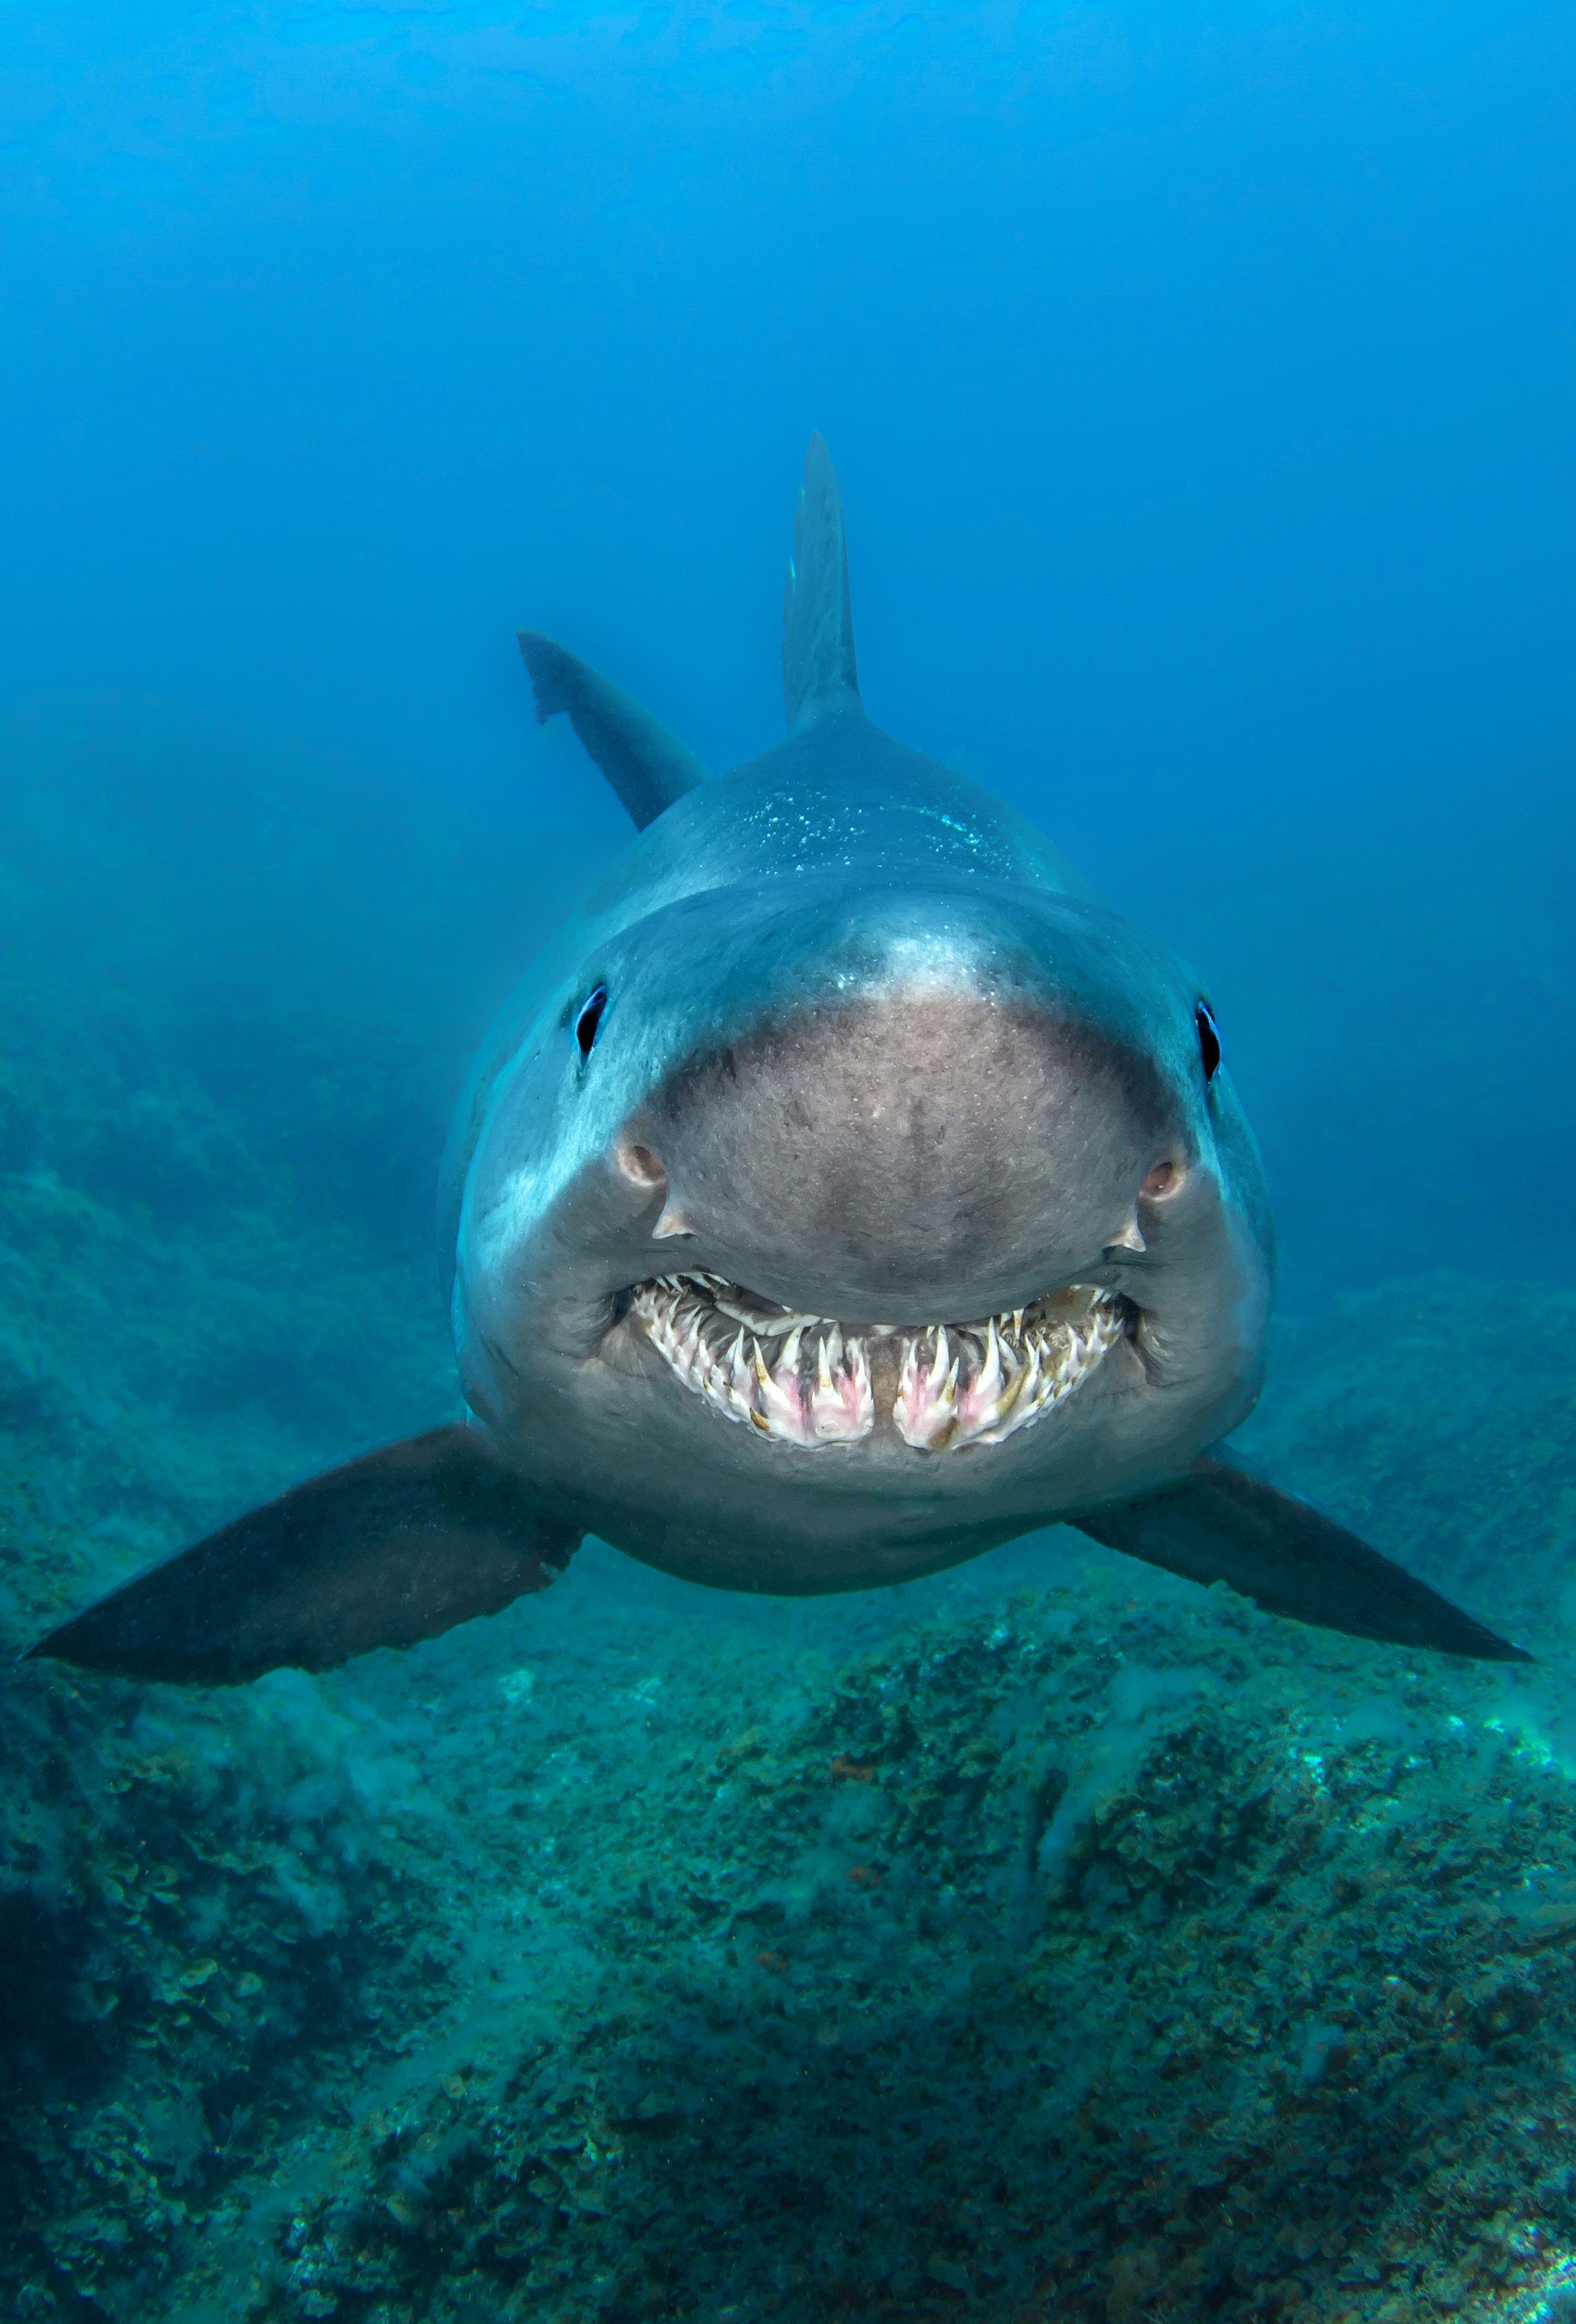 The smile of the shark.